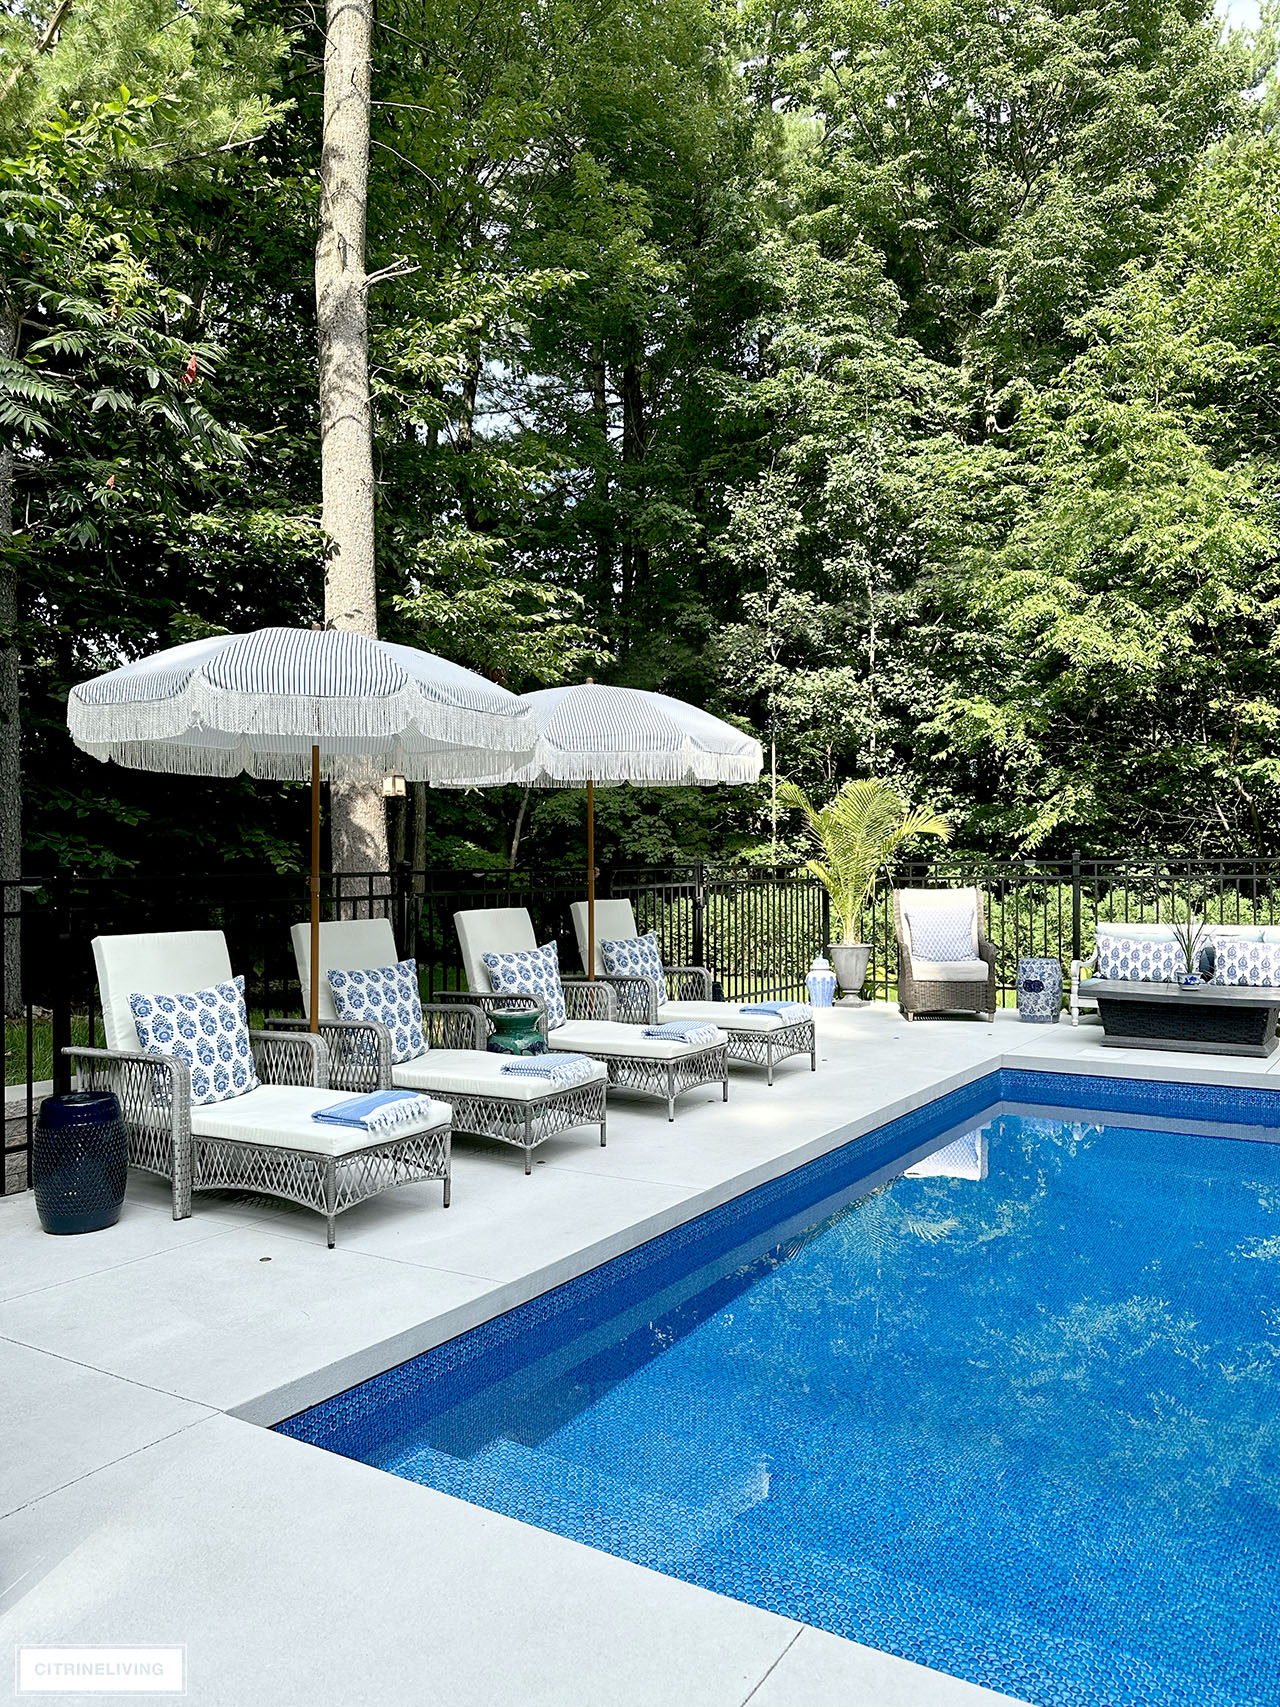 Resort style pool with loungers and fringe umbrellas